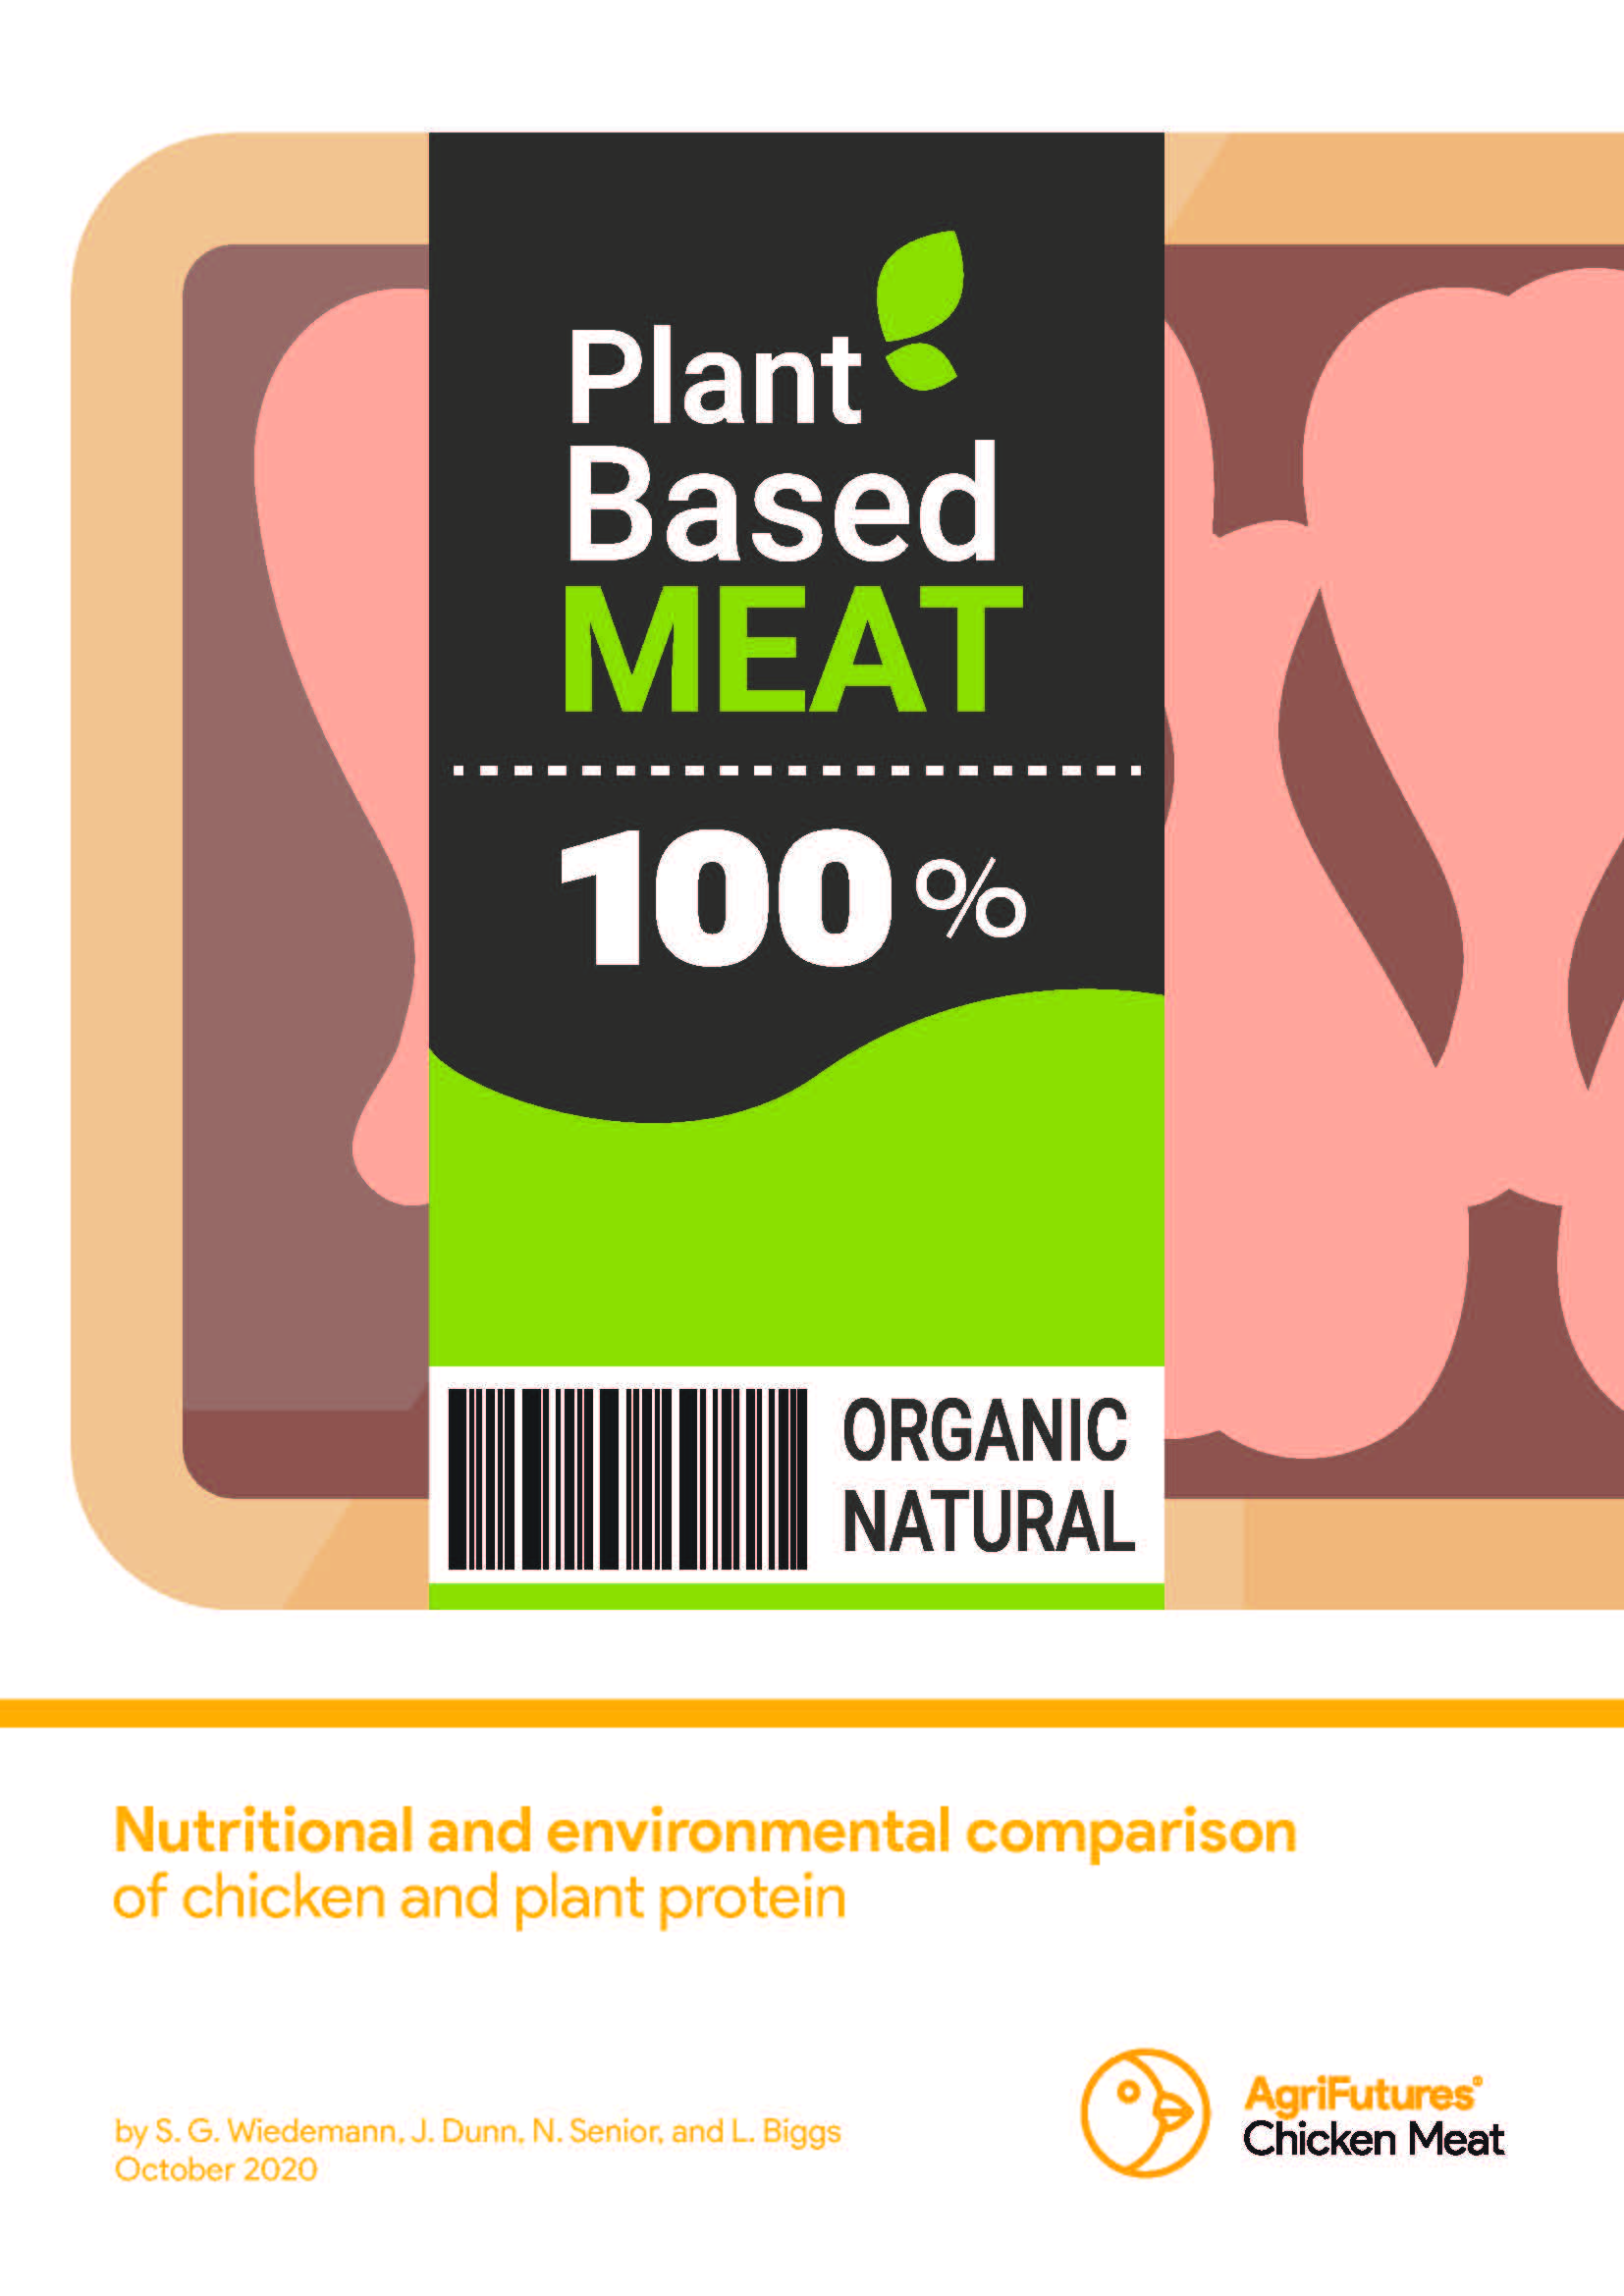 Nutritional and environmental comparison of chicken and plant protein - image